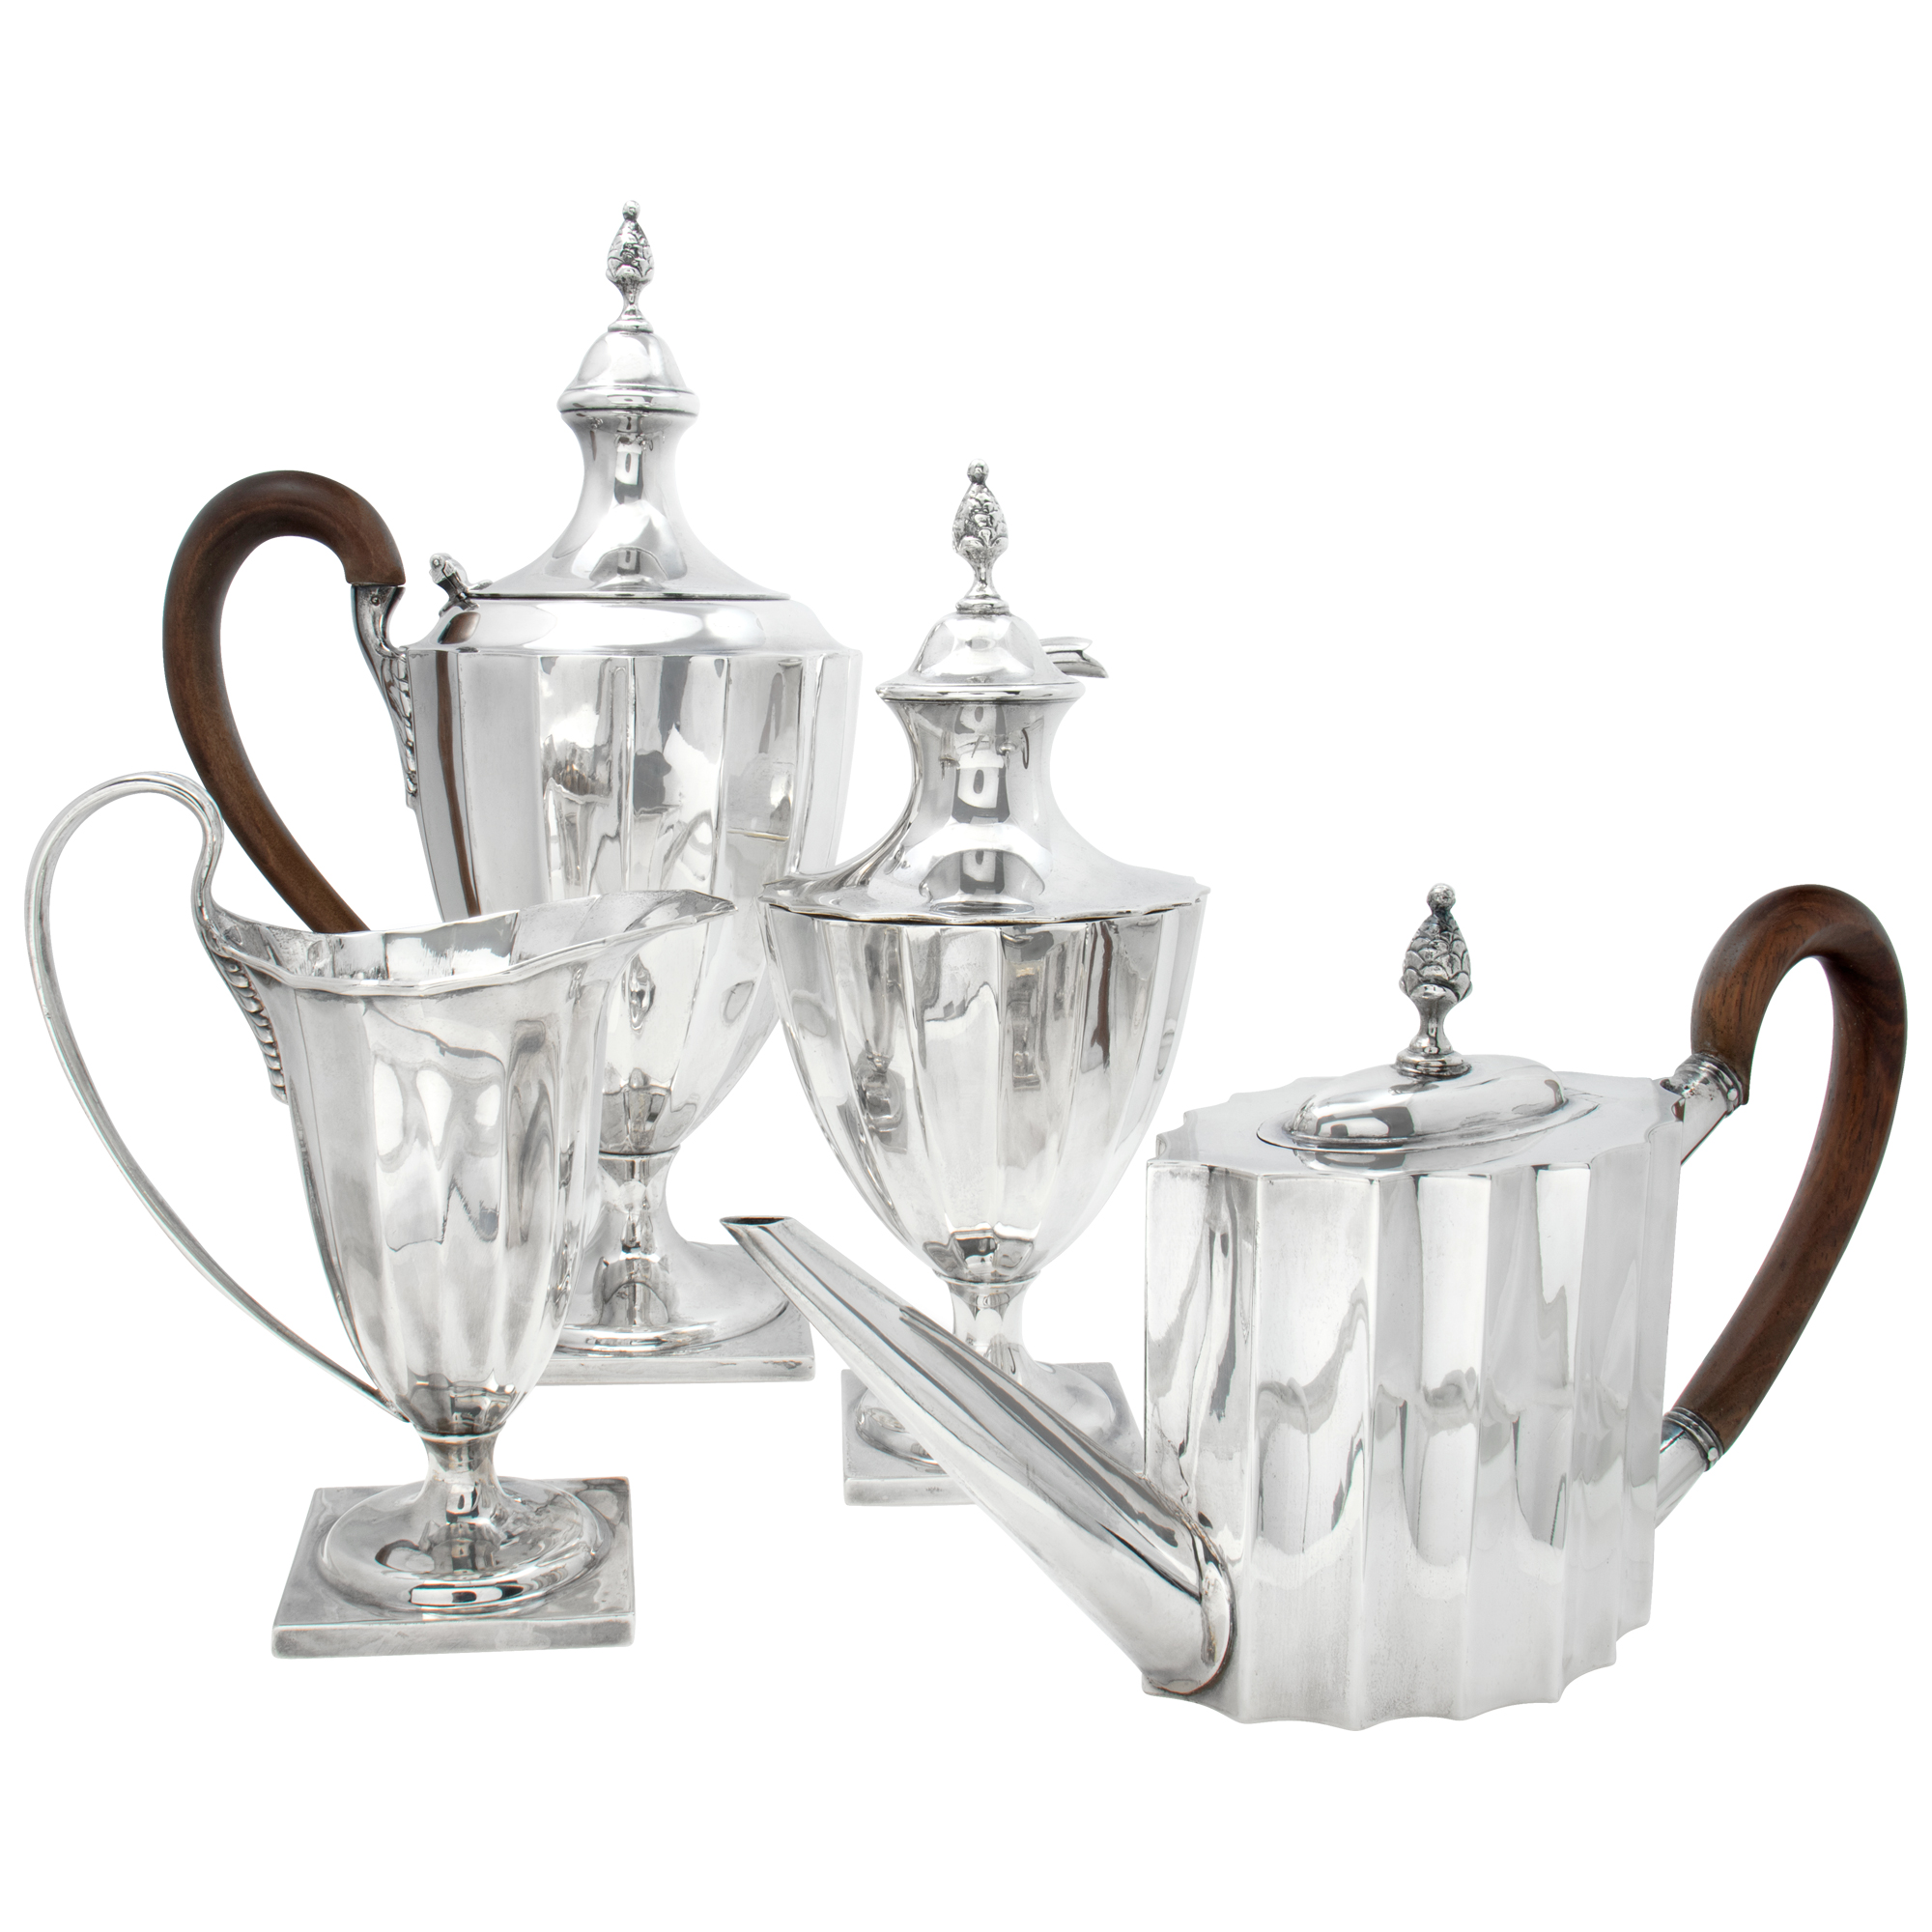 LUCO heavy Hand Wrought Sterling Silver, 4 pieces Tea/coffee set, 1960's reproduction of 1792 English Tea/Coffee set. Over 63 troy ounces of .925 handwrought sterling sil image 1